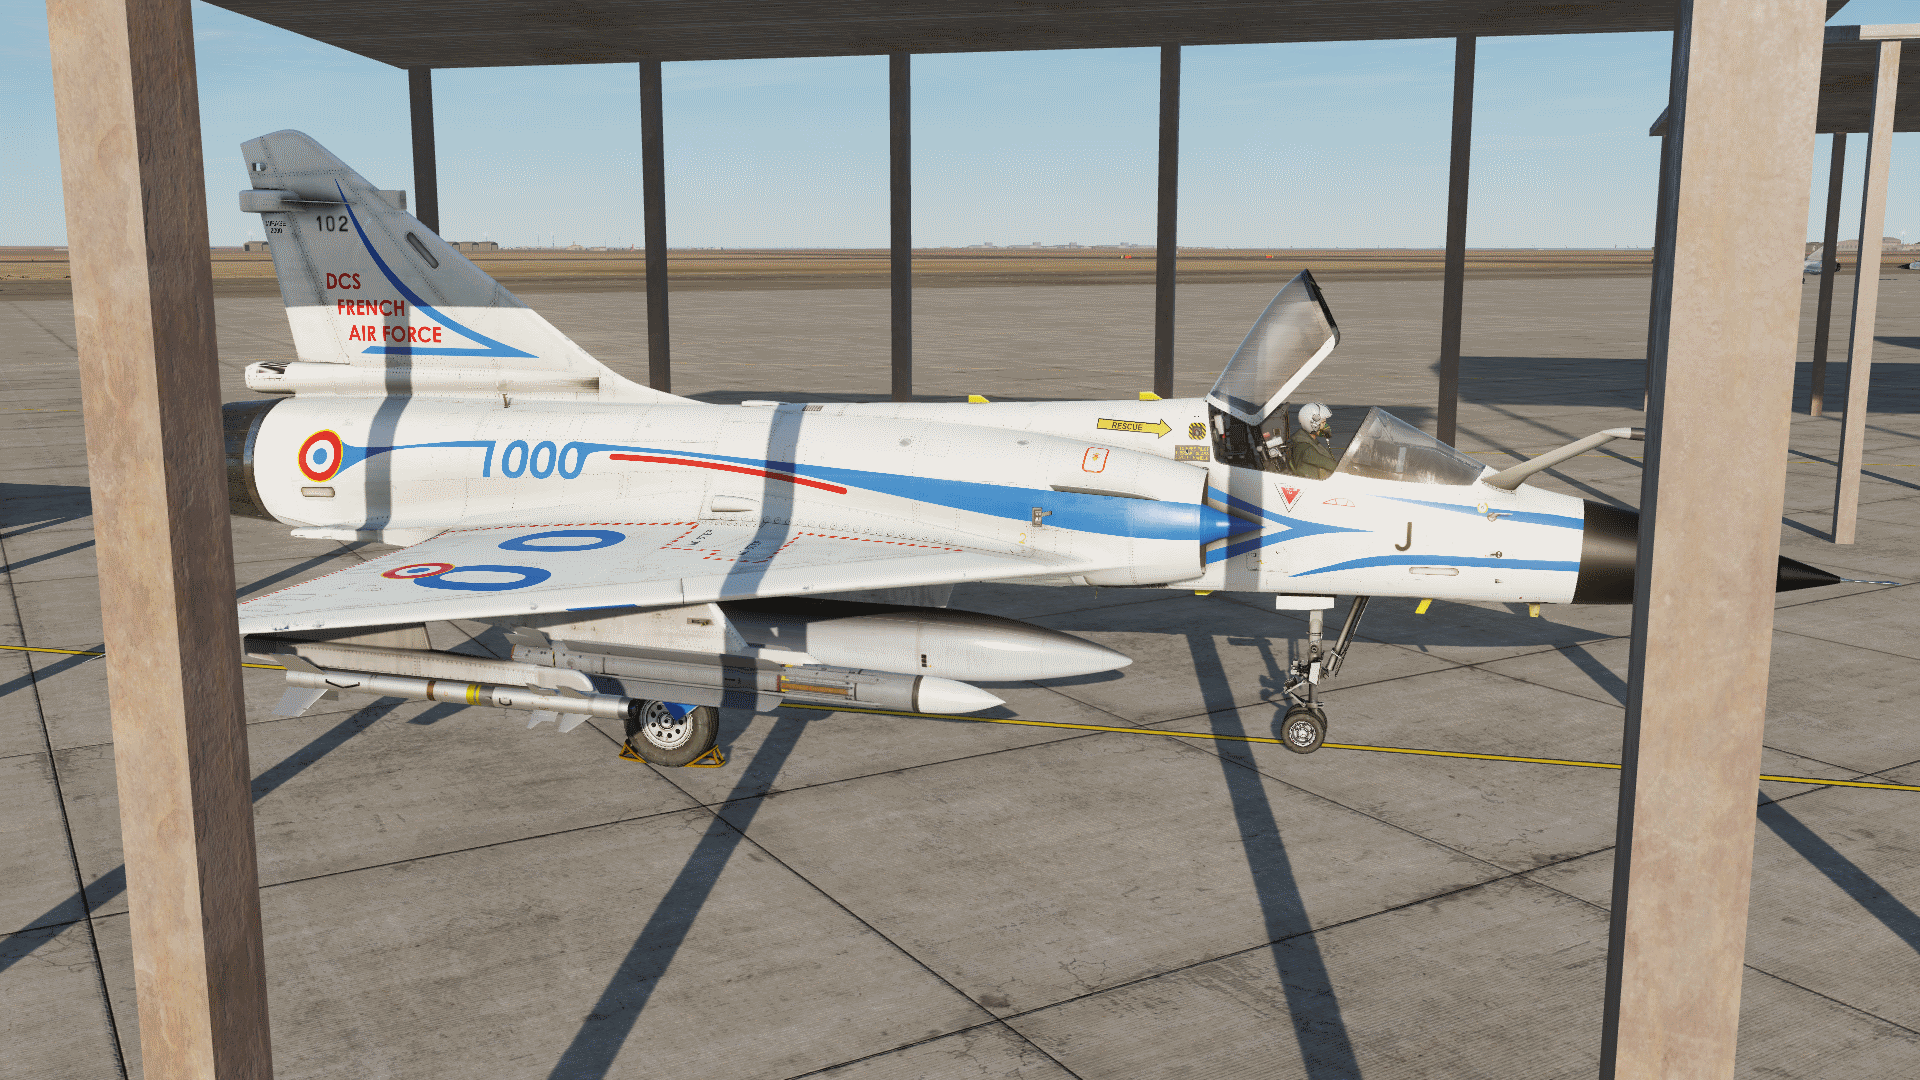 DCS French Air Force : 1.000 subs